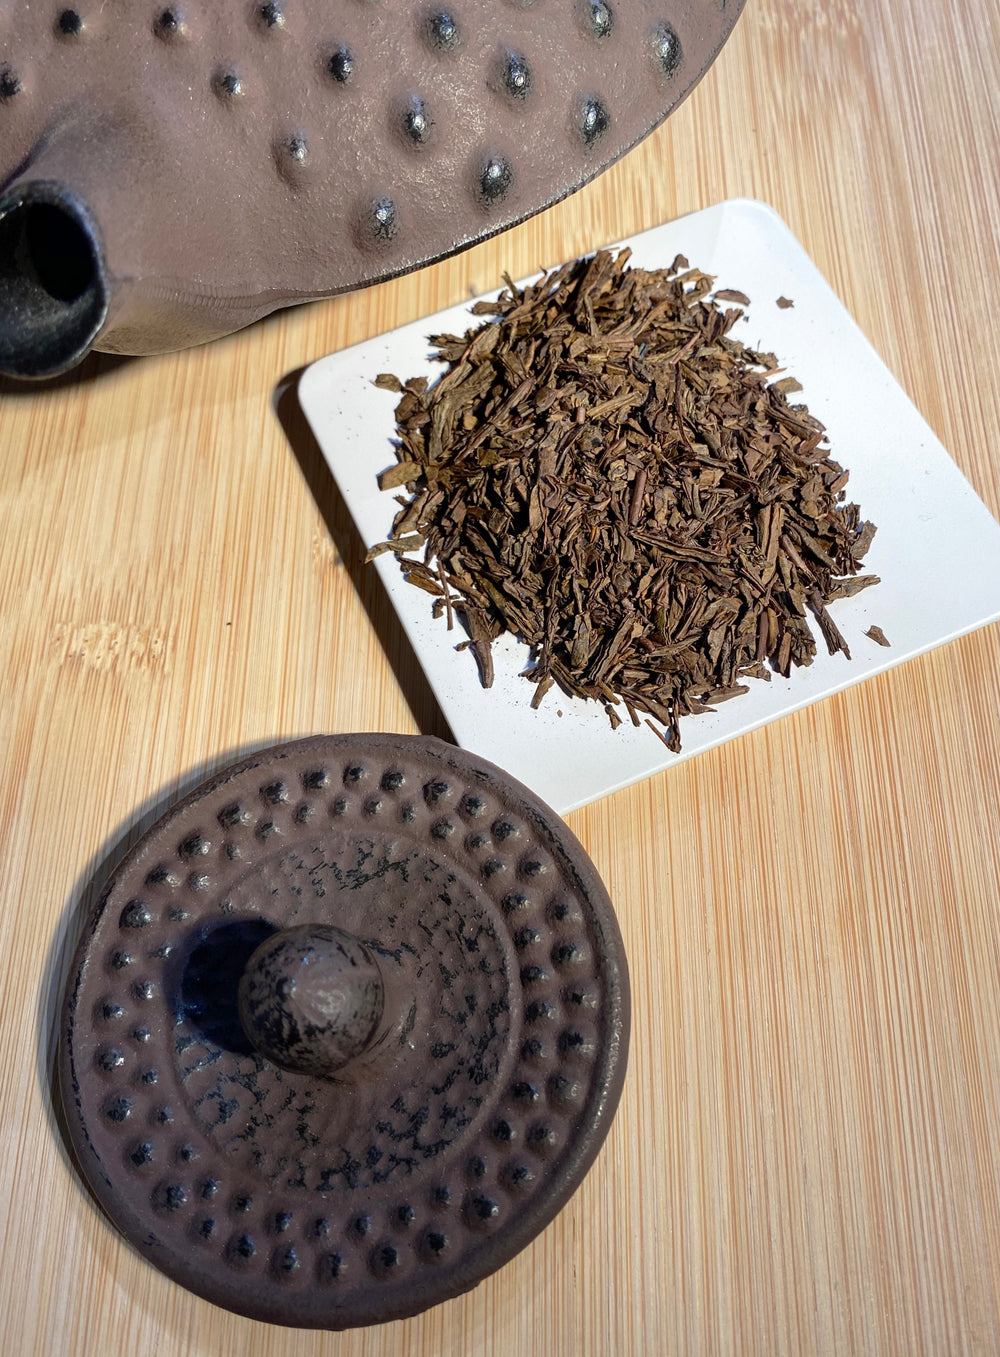 Grilled Hojicha - Roasted tea with woody flavors